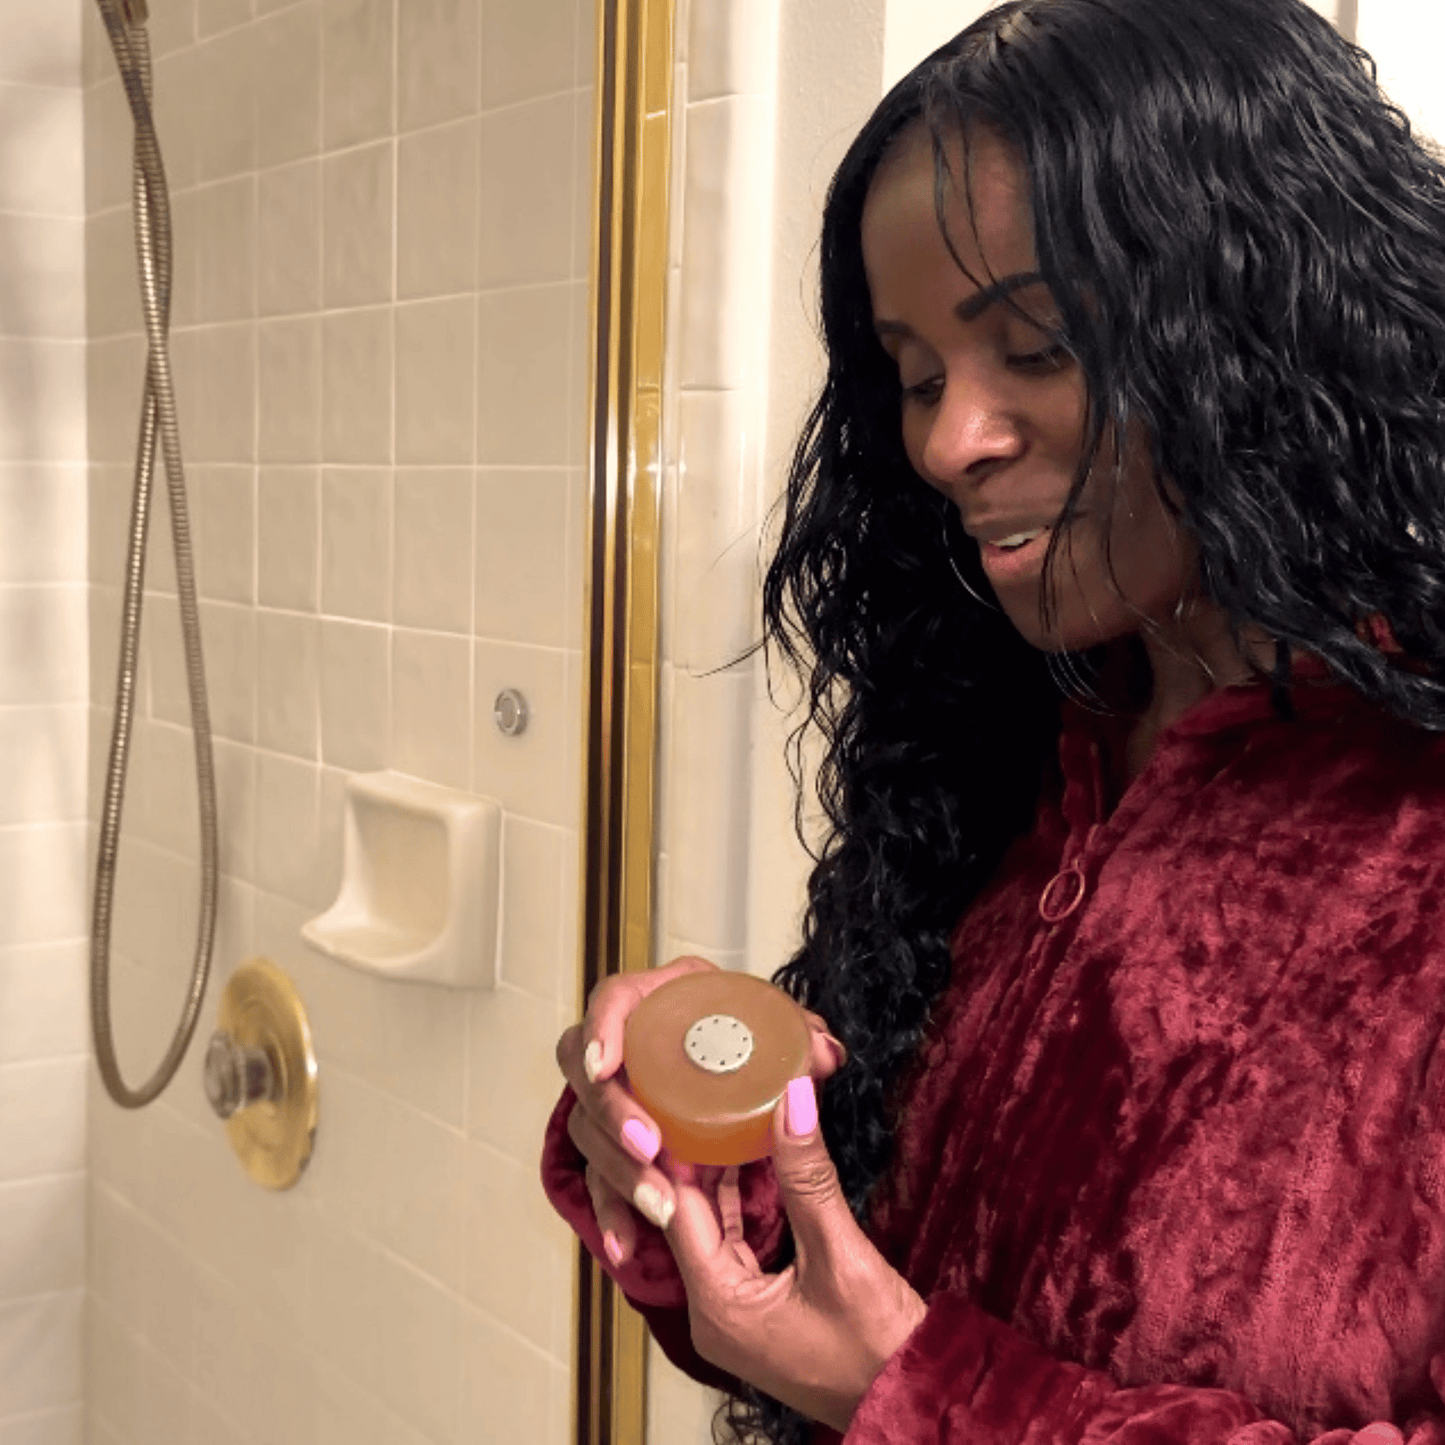 Woman proudly displaying Mirai Clinical's innovative soap bar with its accompanying magnet, emphasizing the brand's unique approach to soap storage and prolonging soap lifespan.